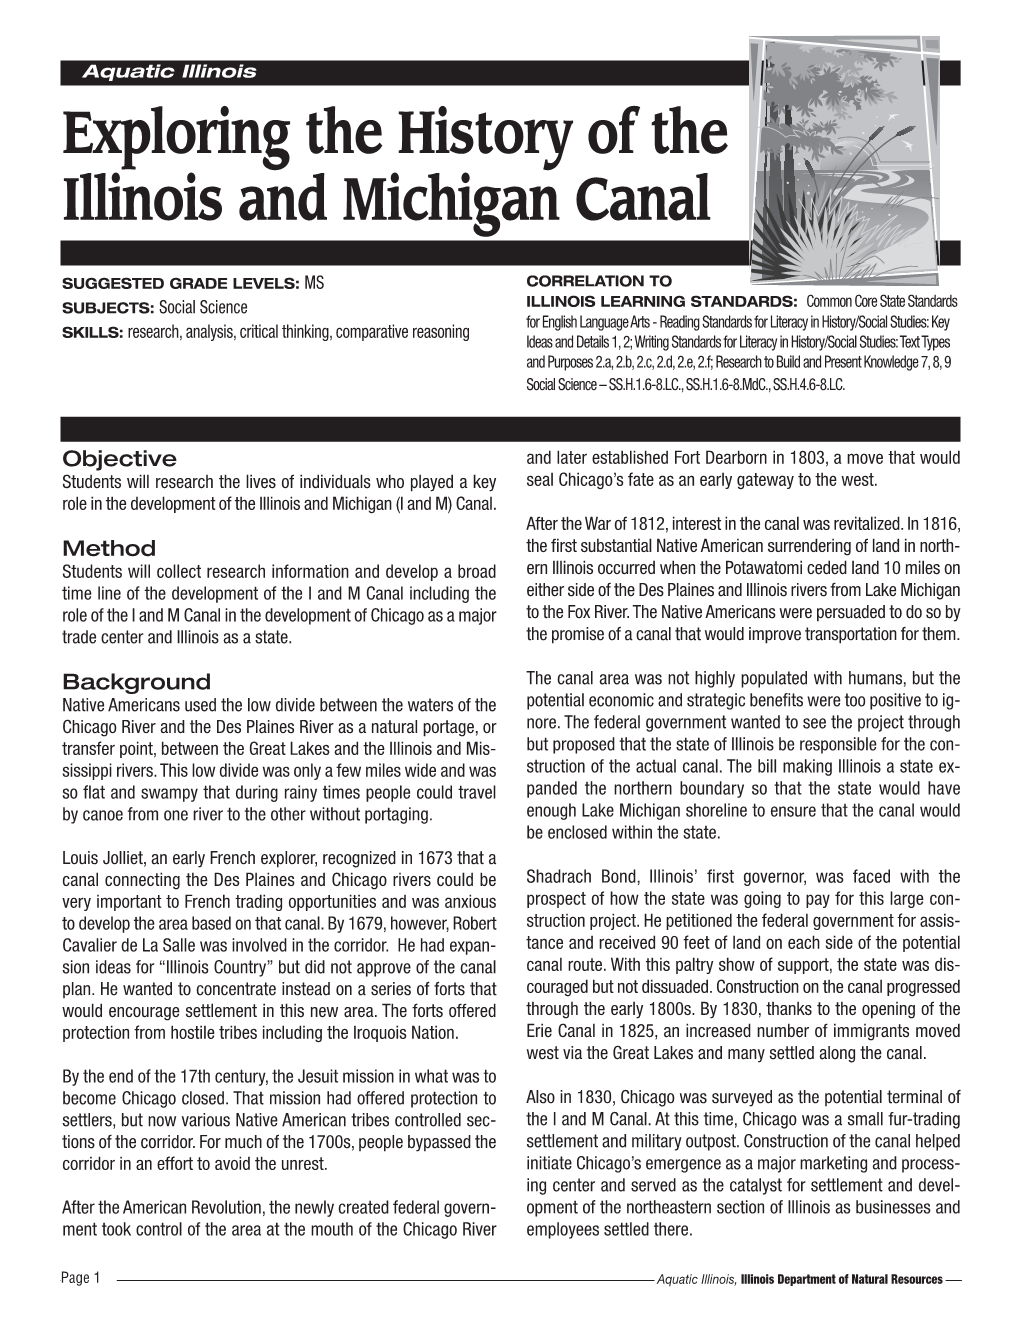 Exploring the History of the Illinois and Michigan Canal